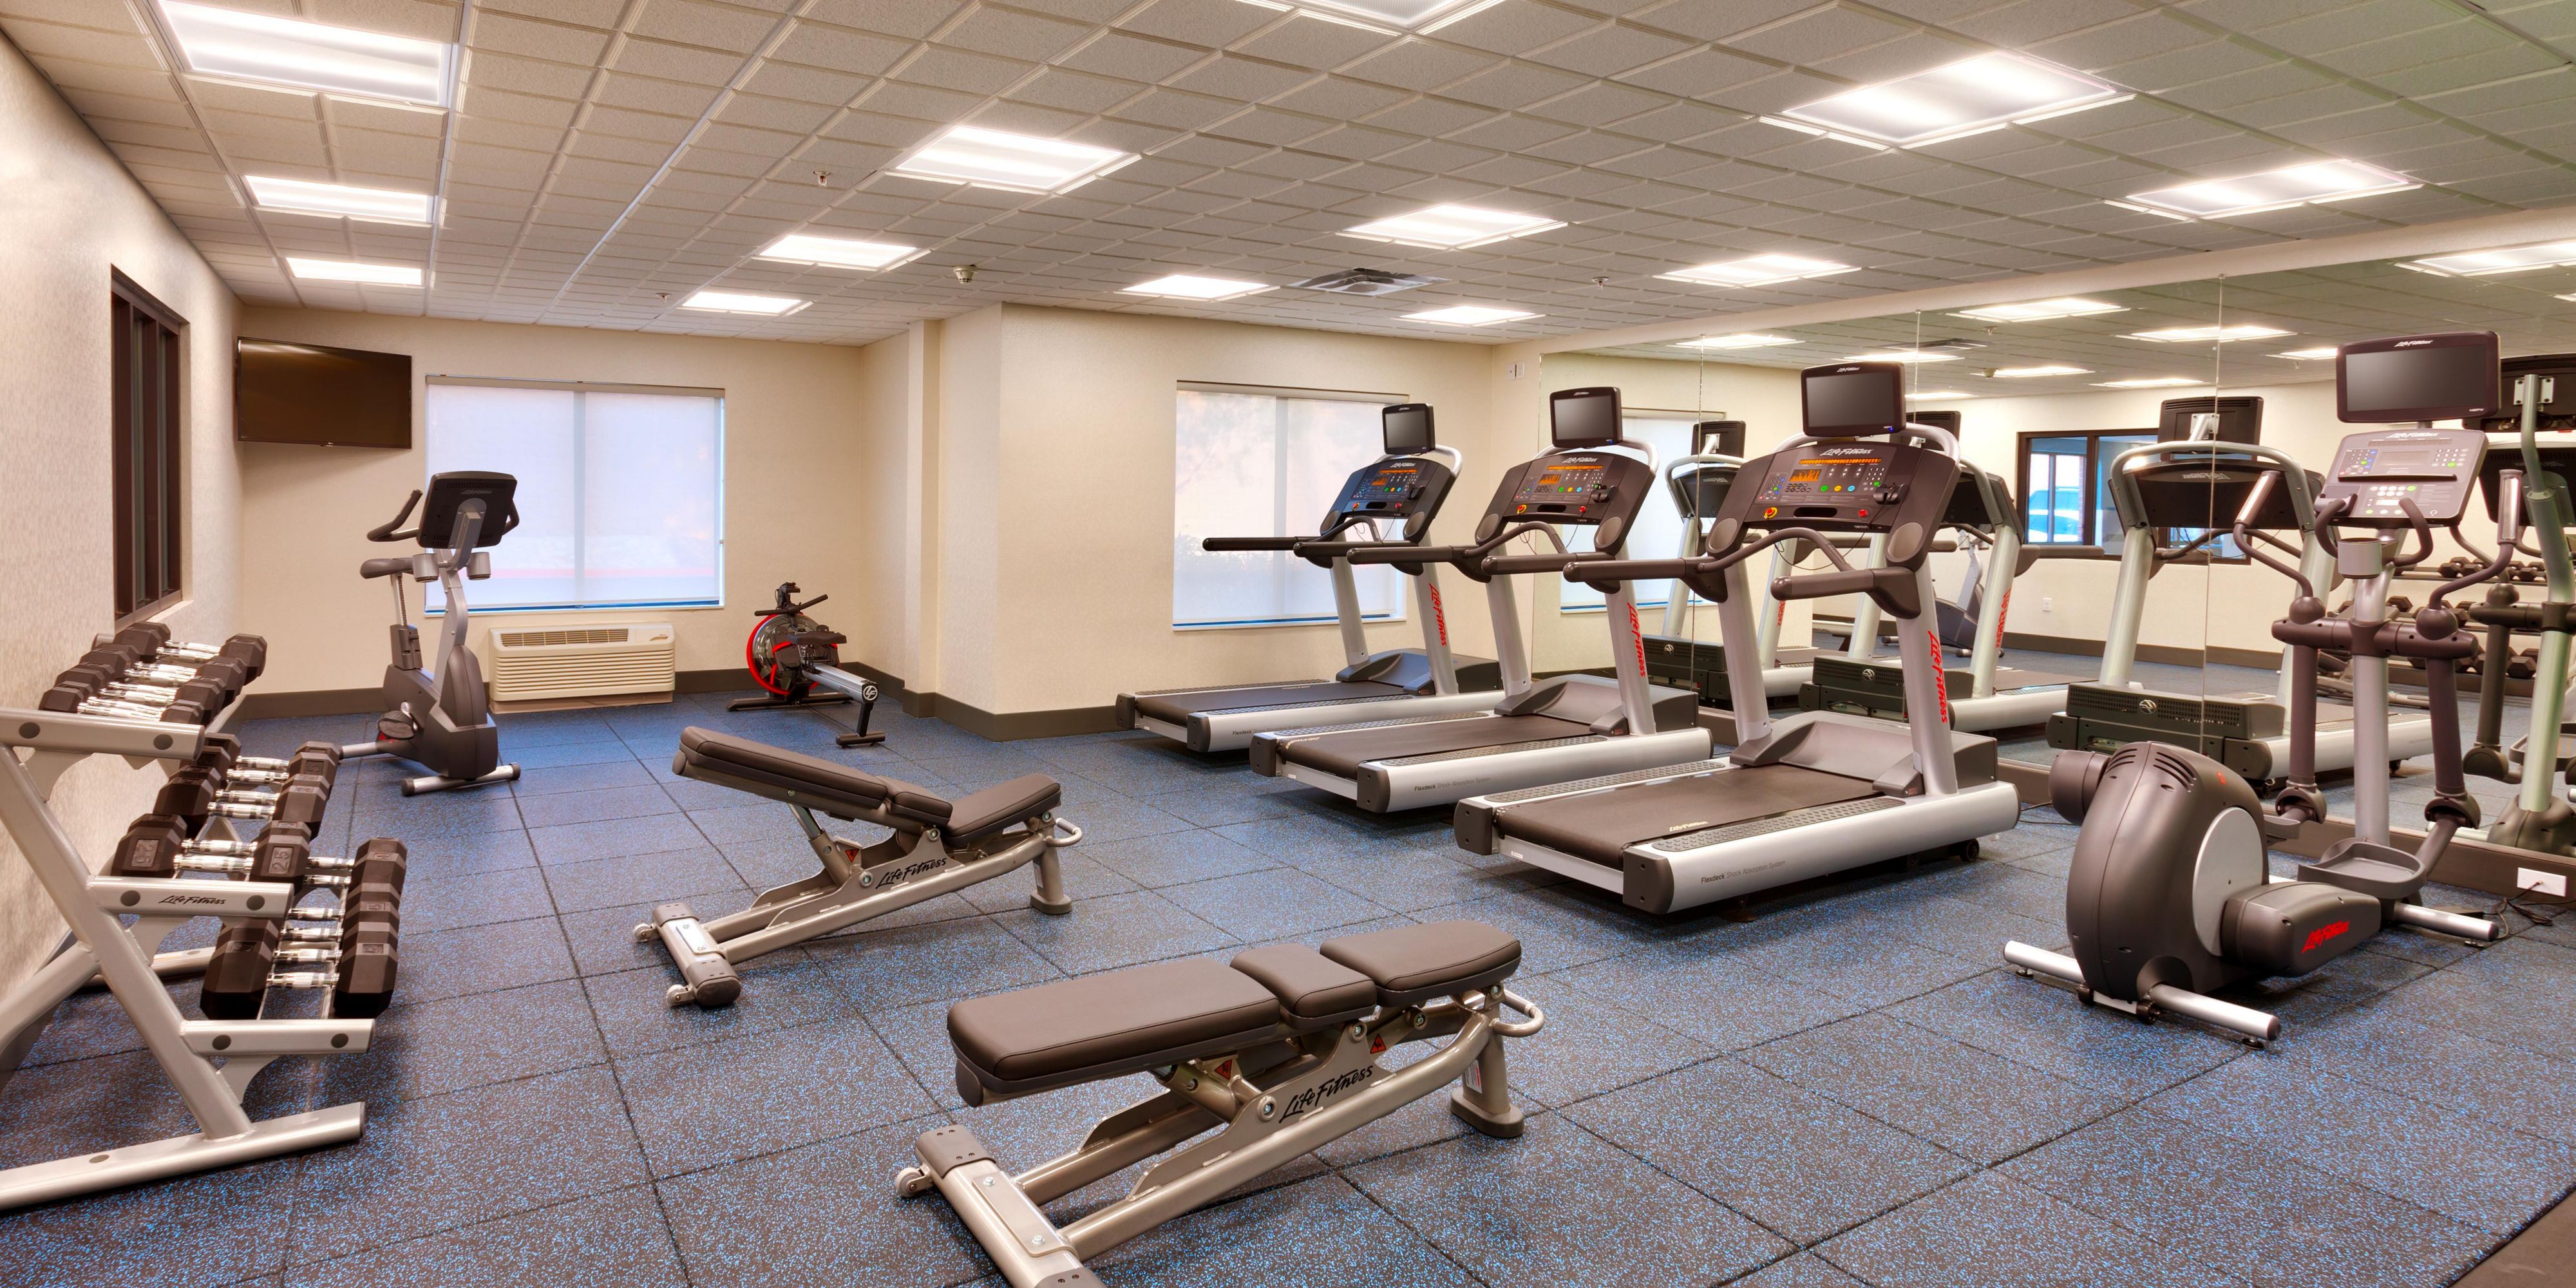 When you're away from home you can bring your workout routine with you.  You can bulk up or get some cardio going in our oversized and state of the art fitness center equipped with a bike, row machine, treadmills, ellipticals and free weights.  Stay healthy.  Stay with us. 